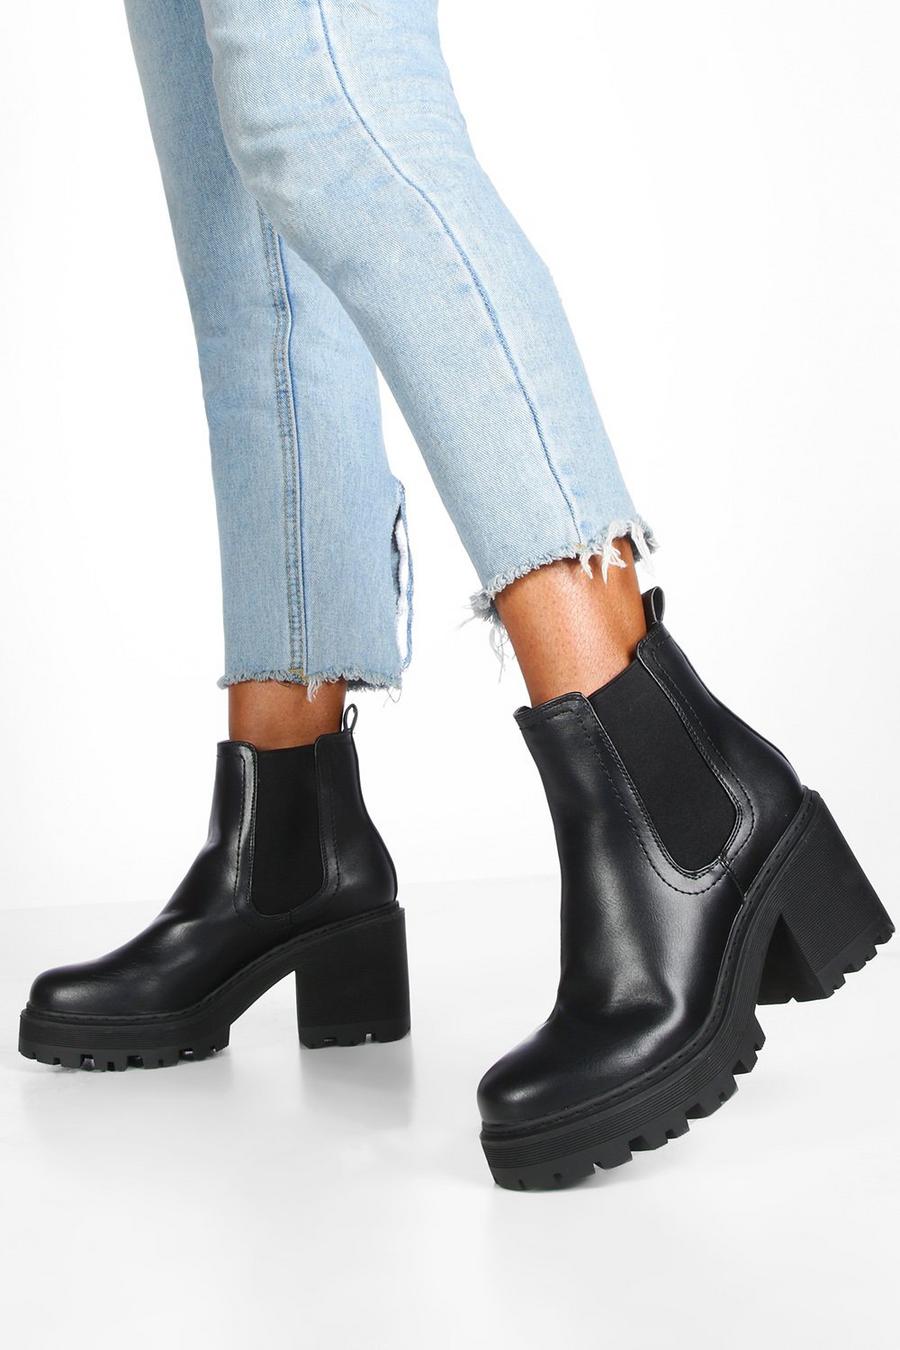 New Look Leather High Ankle Chunky Cleated Chelsea Boots Vegan in Black Womens Shoes Boots Ankle boots 